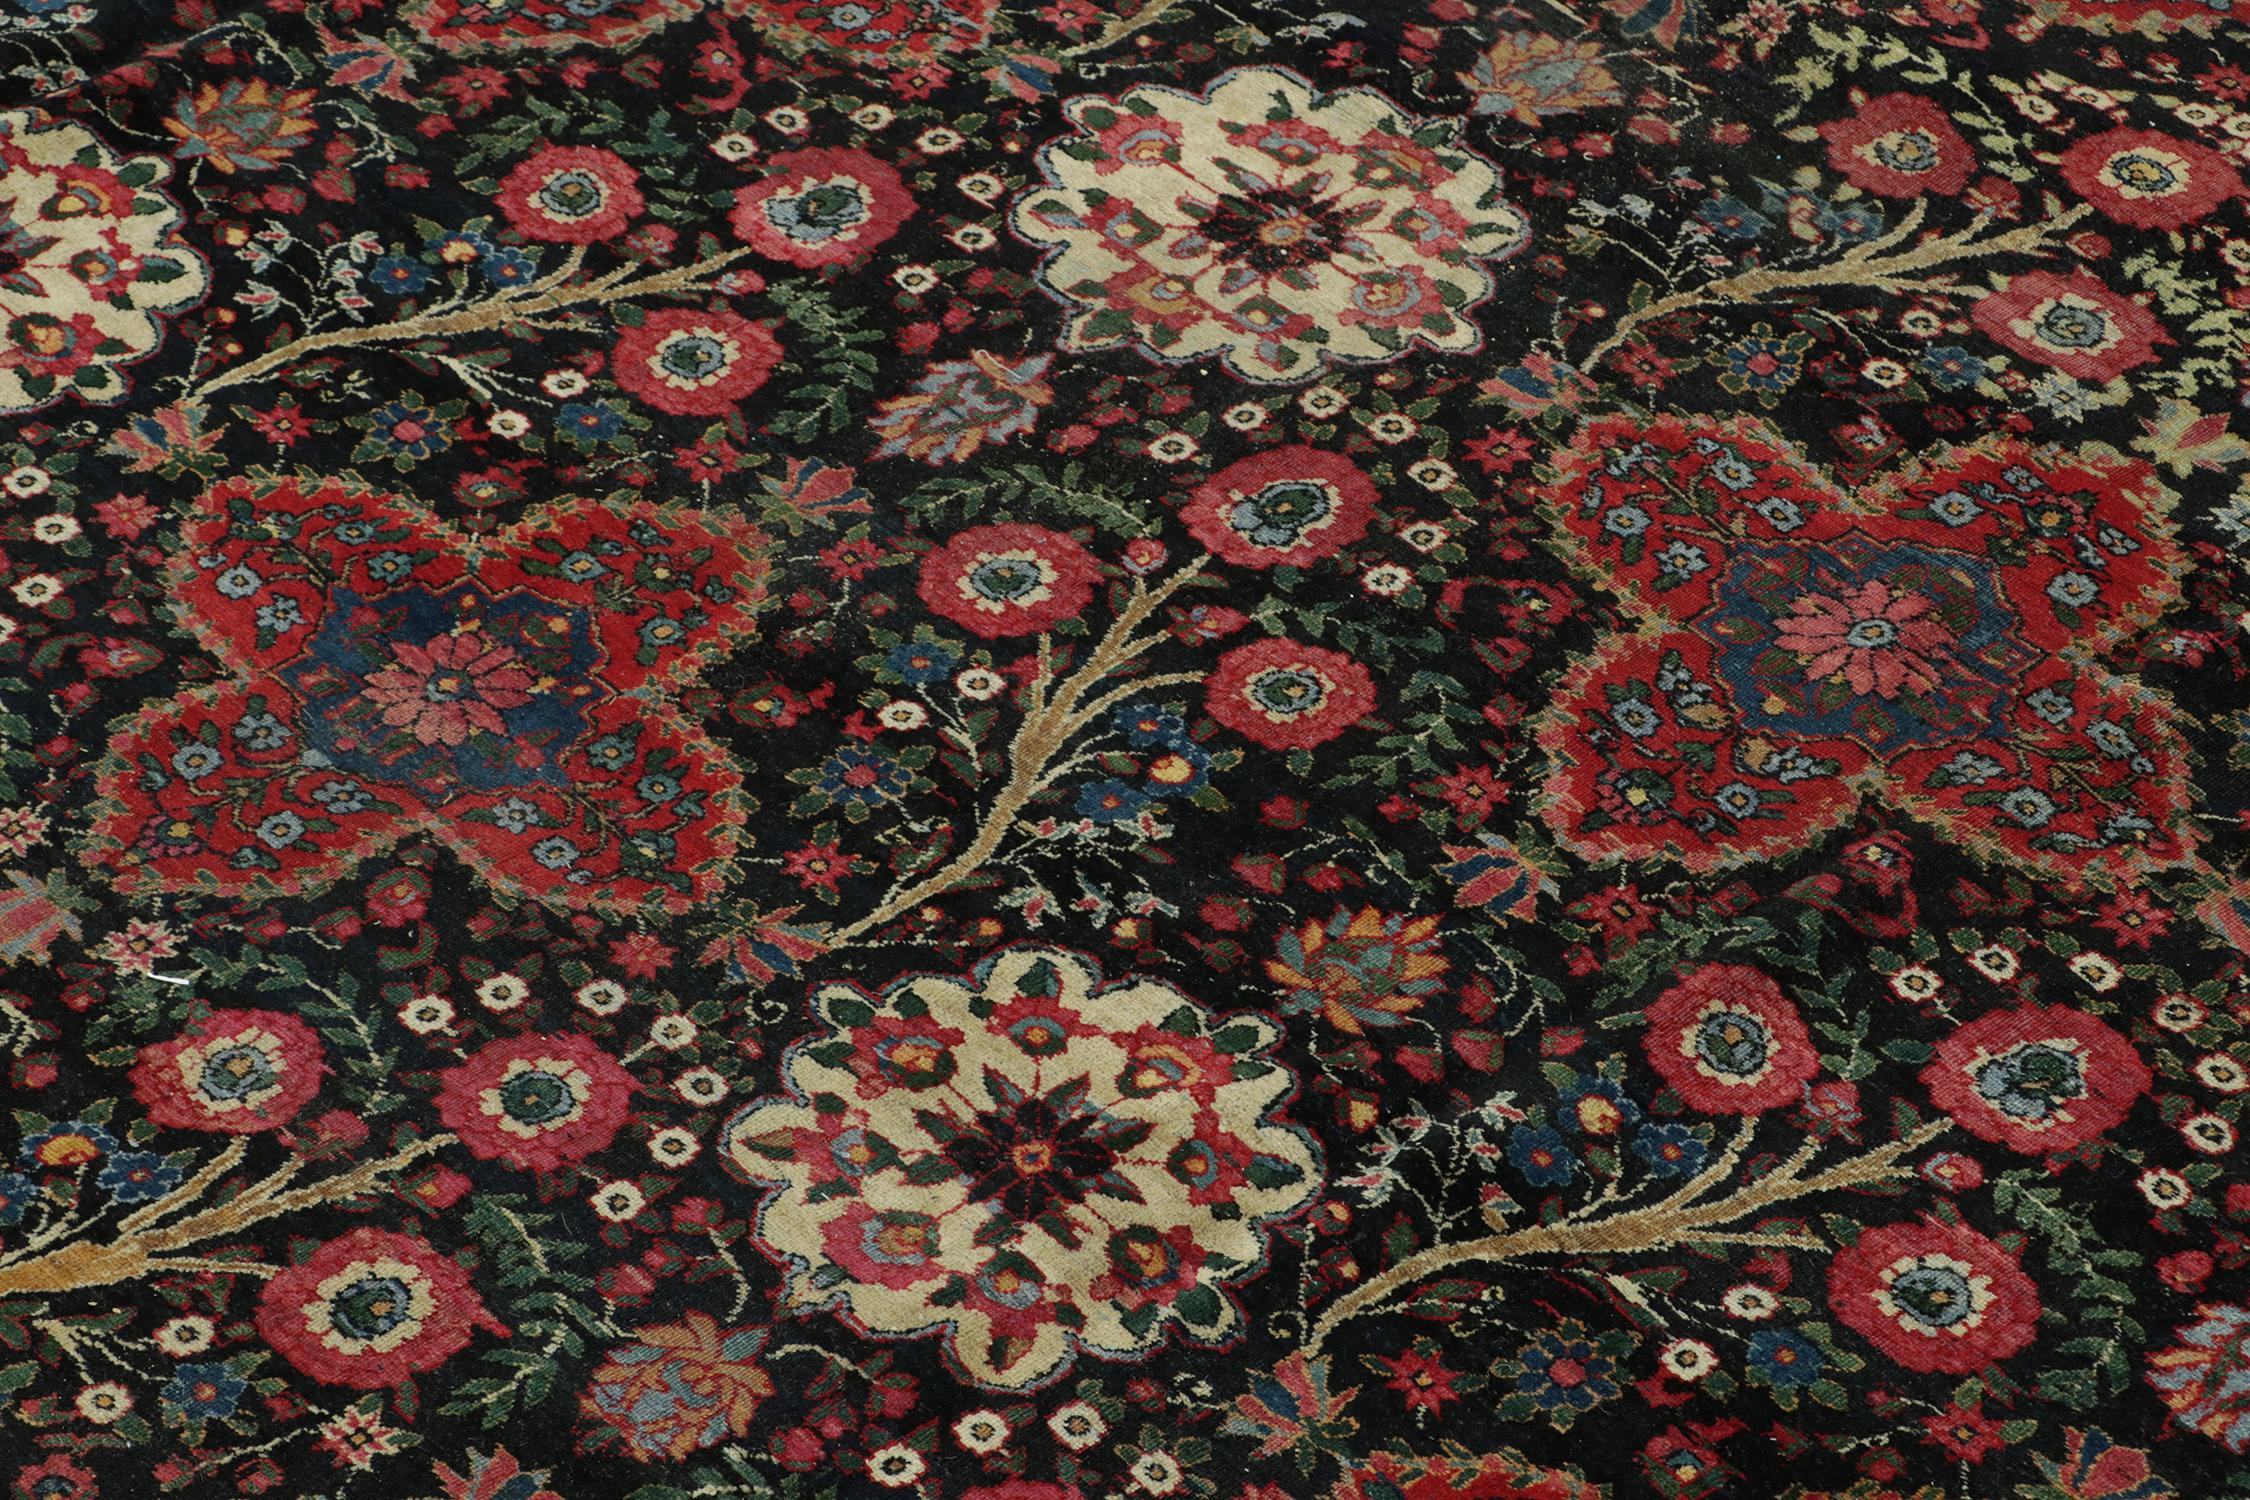 Early 20th Century Antique Persian Rug in Black with Red Floral Patterns - by Rug & Kilim For Sale